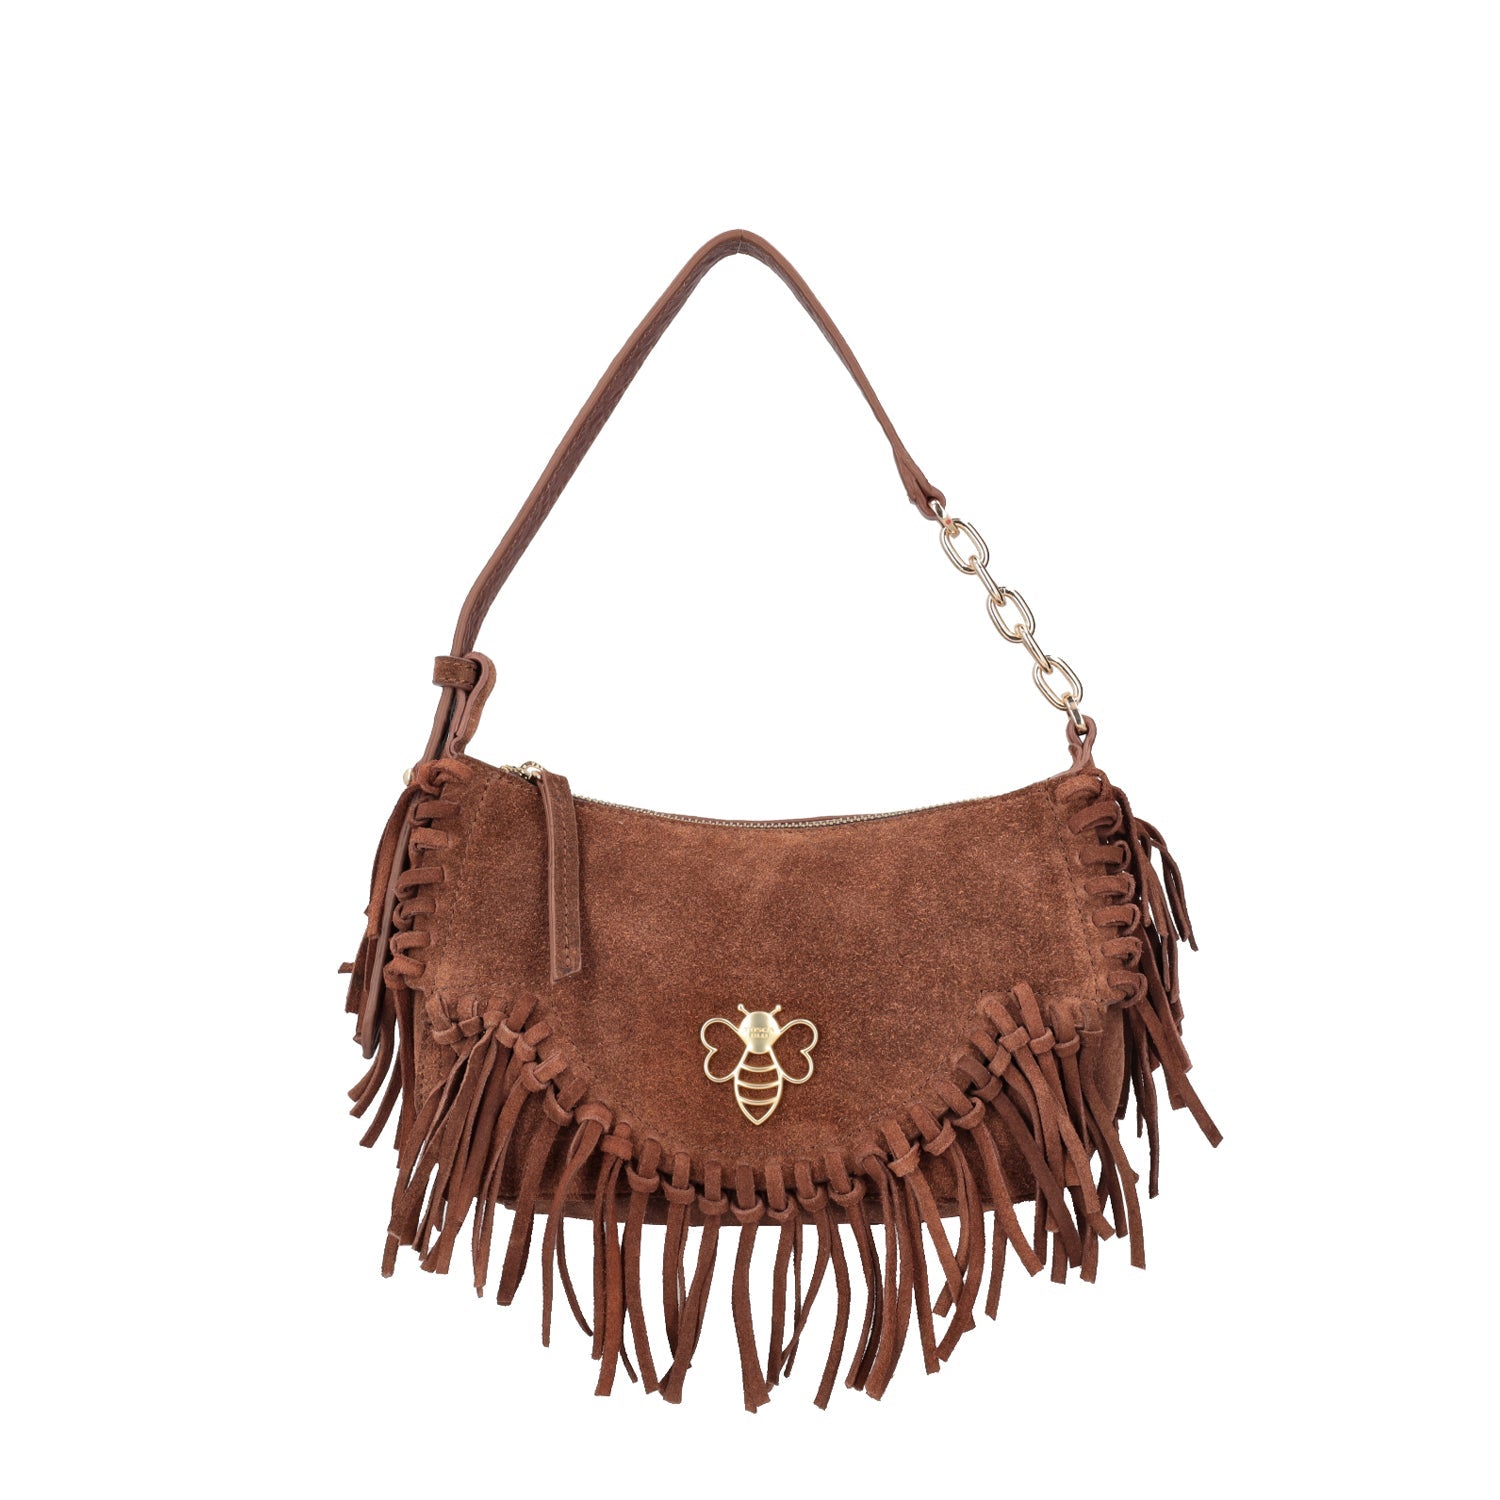 TAN LILIUM CROSSBODY BAG IN SUEDE WITH FRINGES